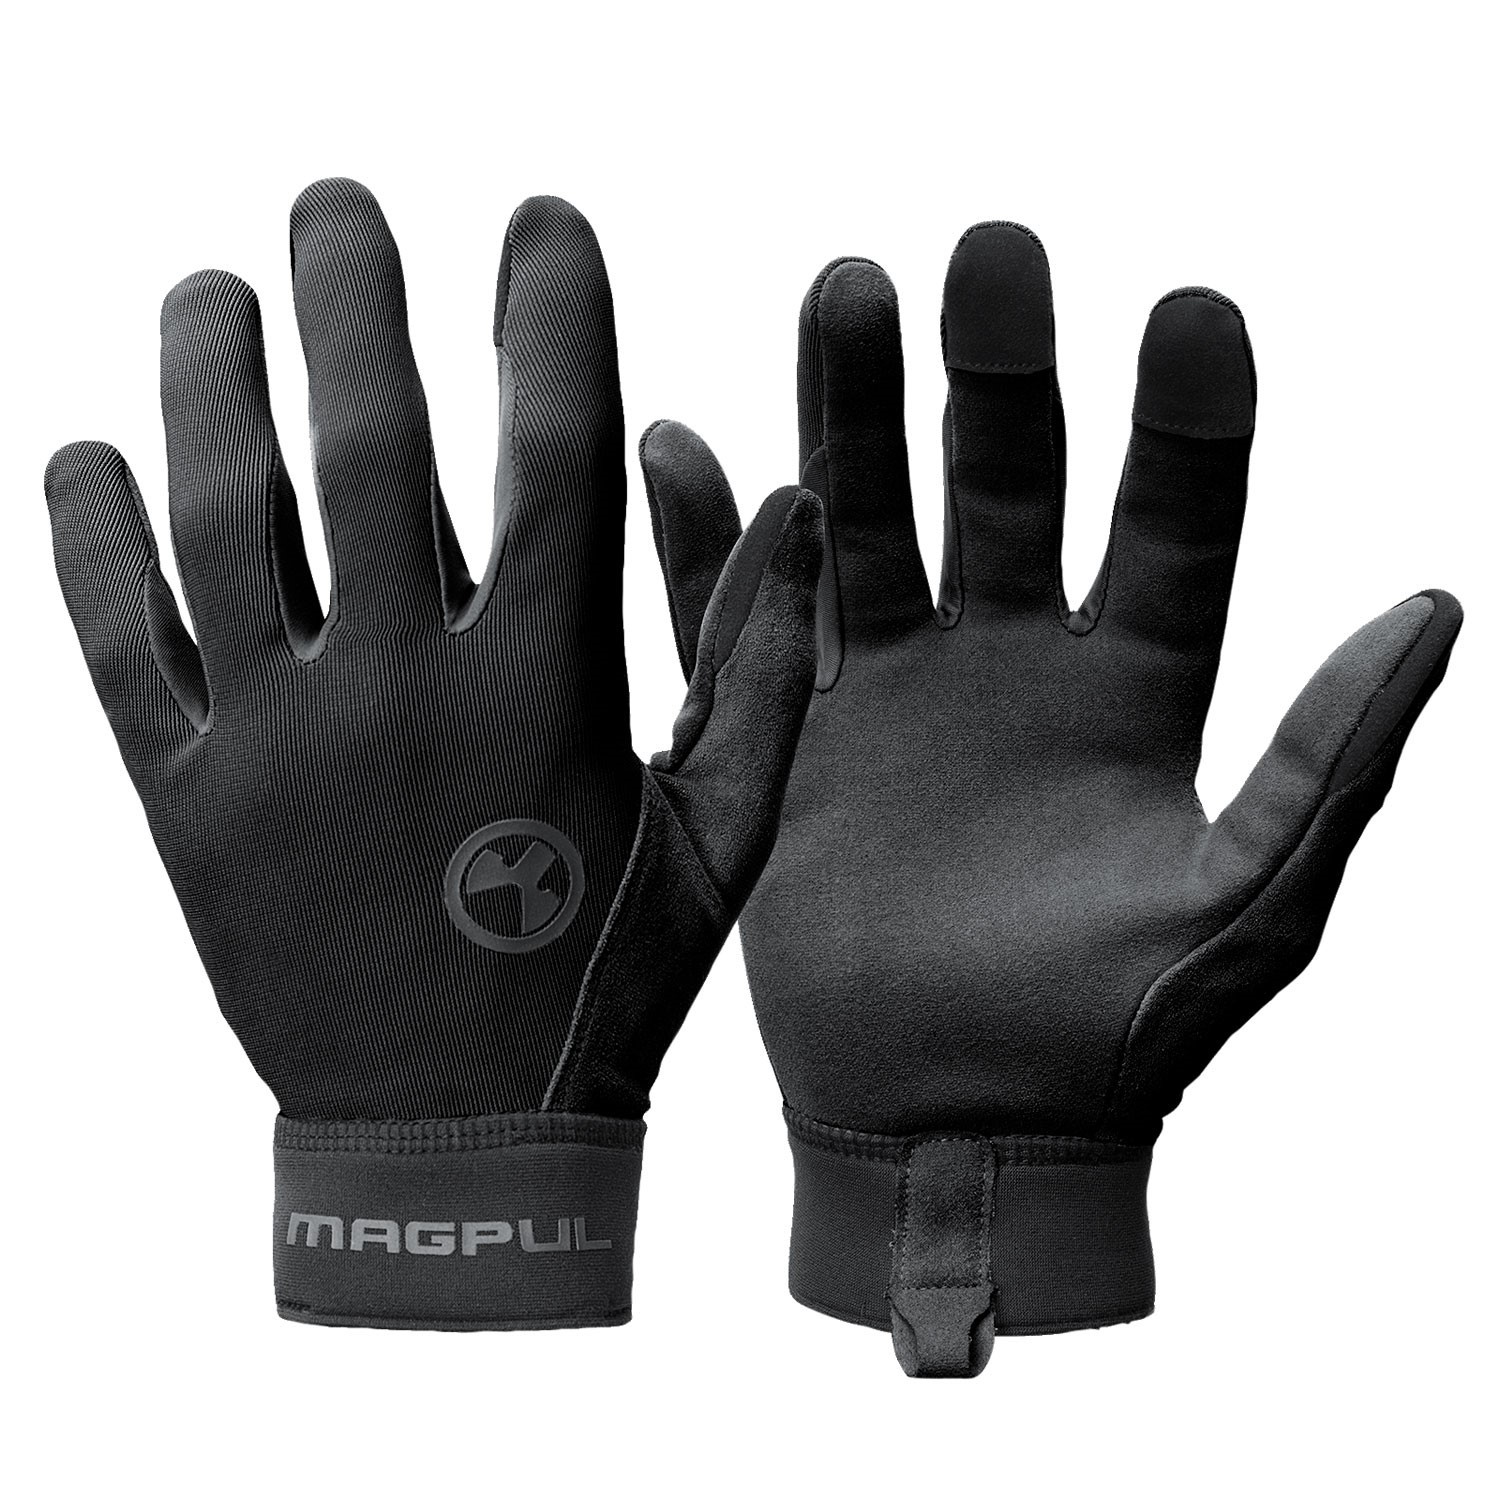 MAGPUL TECHNICAL GLOVES, MD, BLACK, HAS TOUCHSCREEN CAPABLE FINGER TIPS.